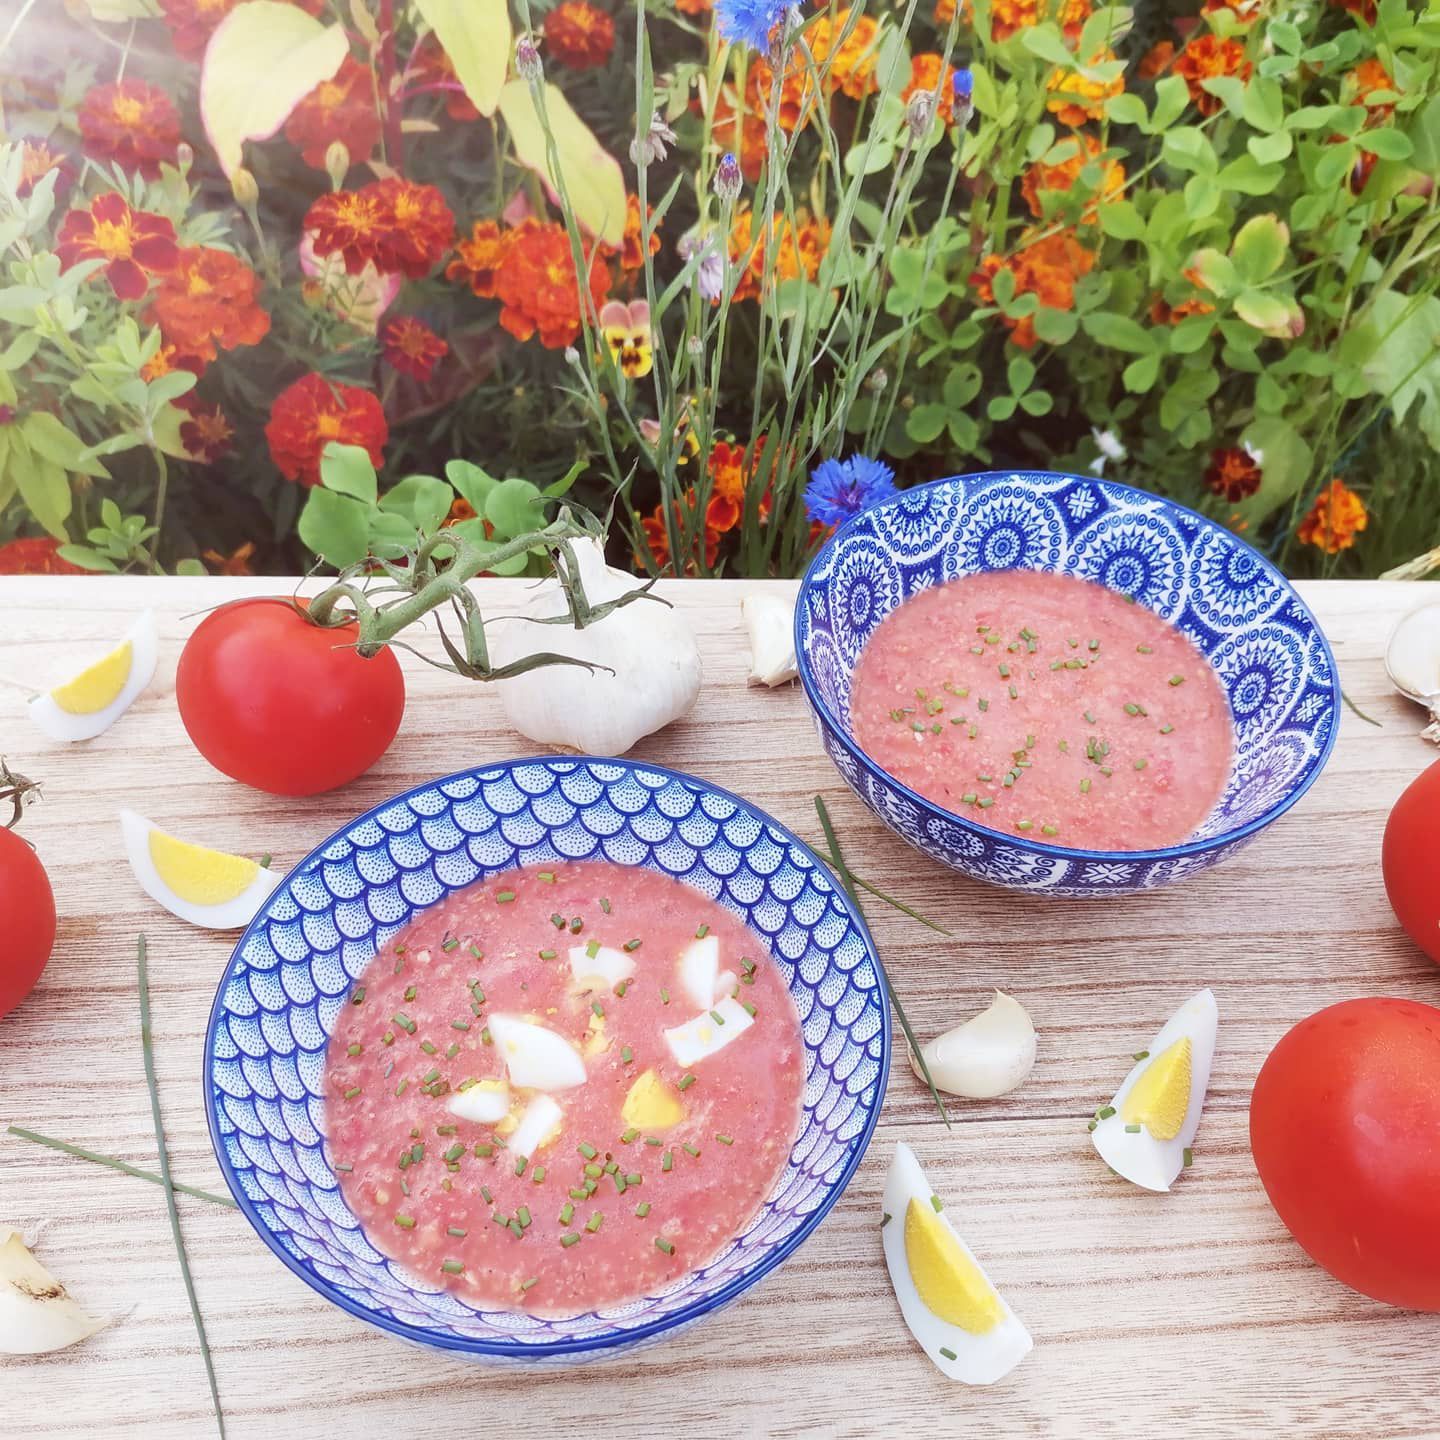 Soupe froide de tomate & oeuf